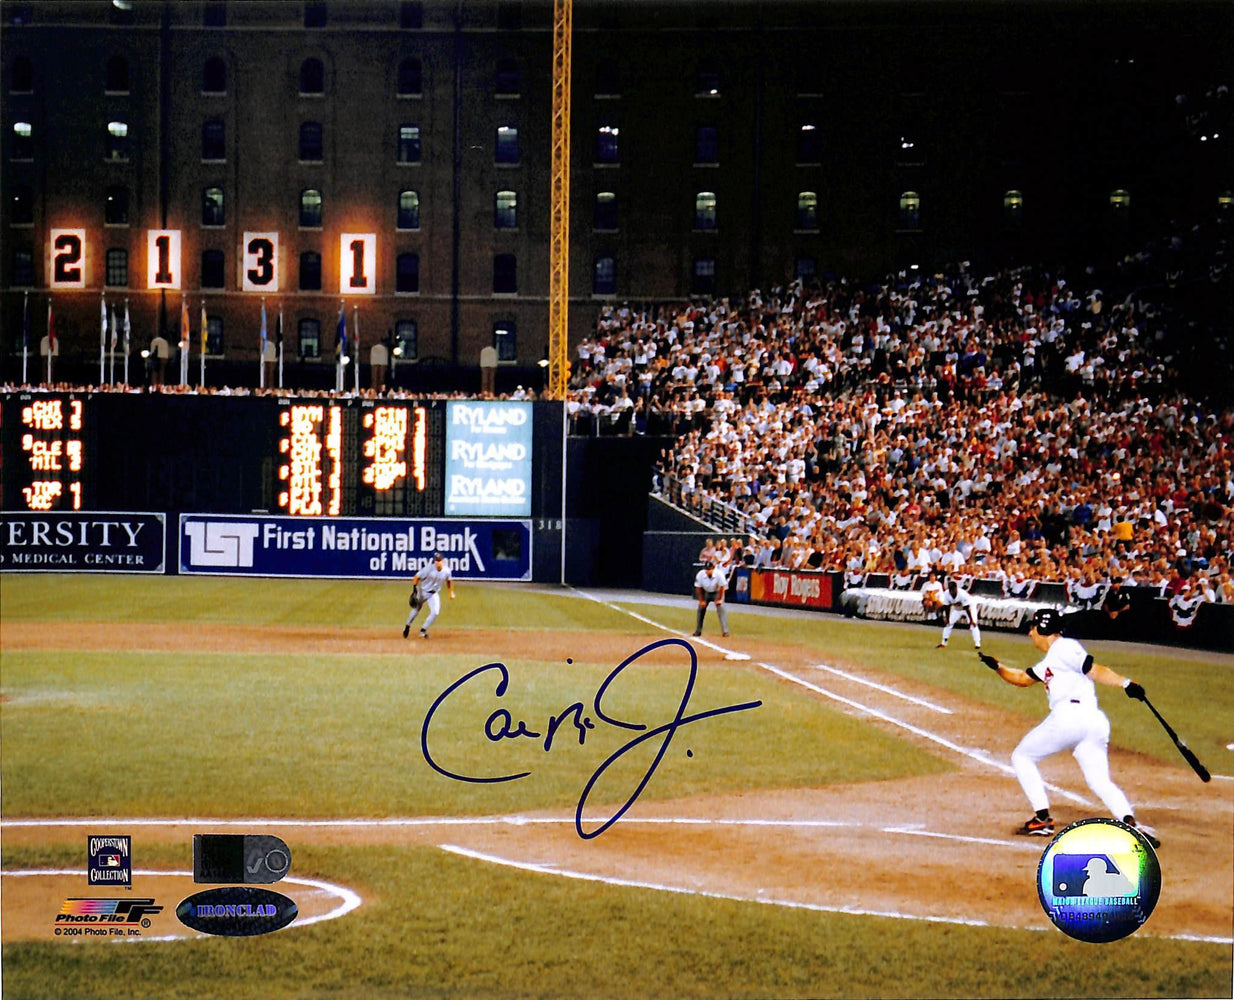 cal ripken jr signed 8x10 photo 2132 lit up aiv certificate of authenticity